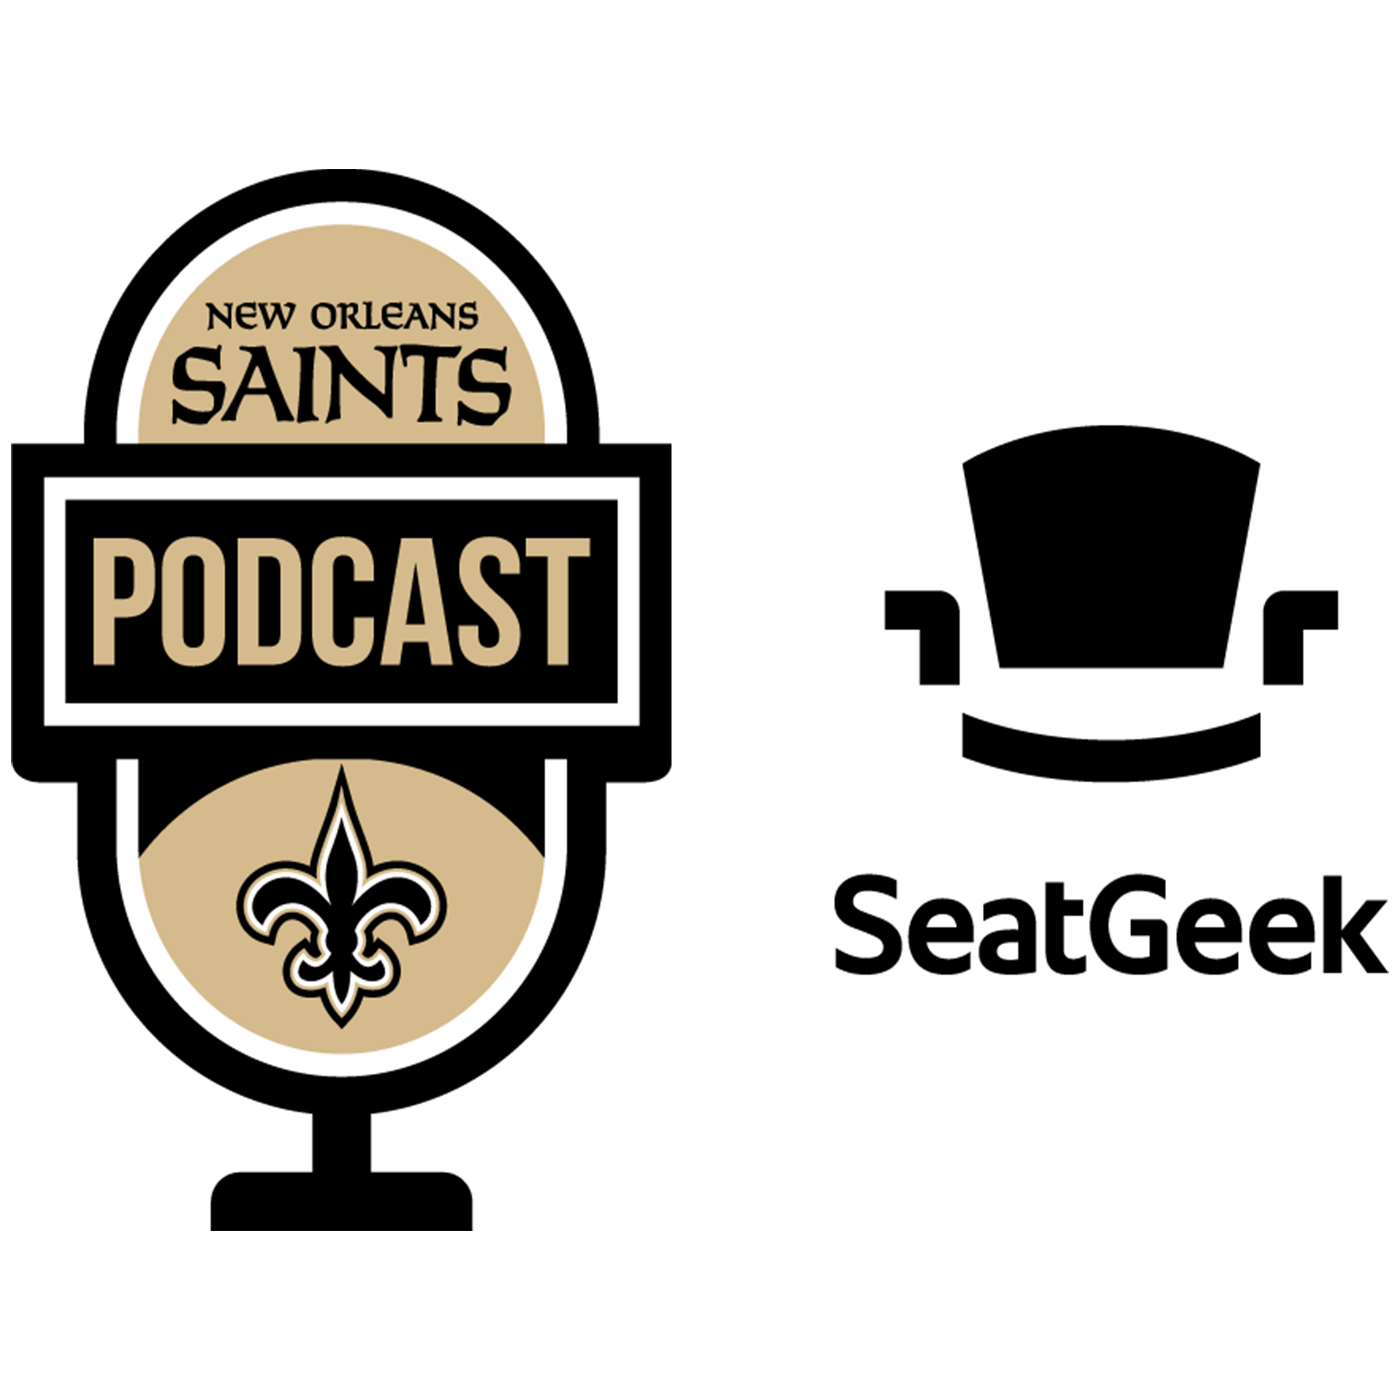 Jim Trotter on the New Orleans Saints Podcast presented by SeatGeek- July 28, 2021